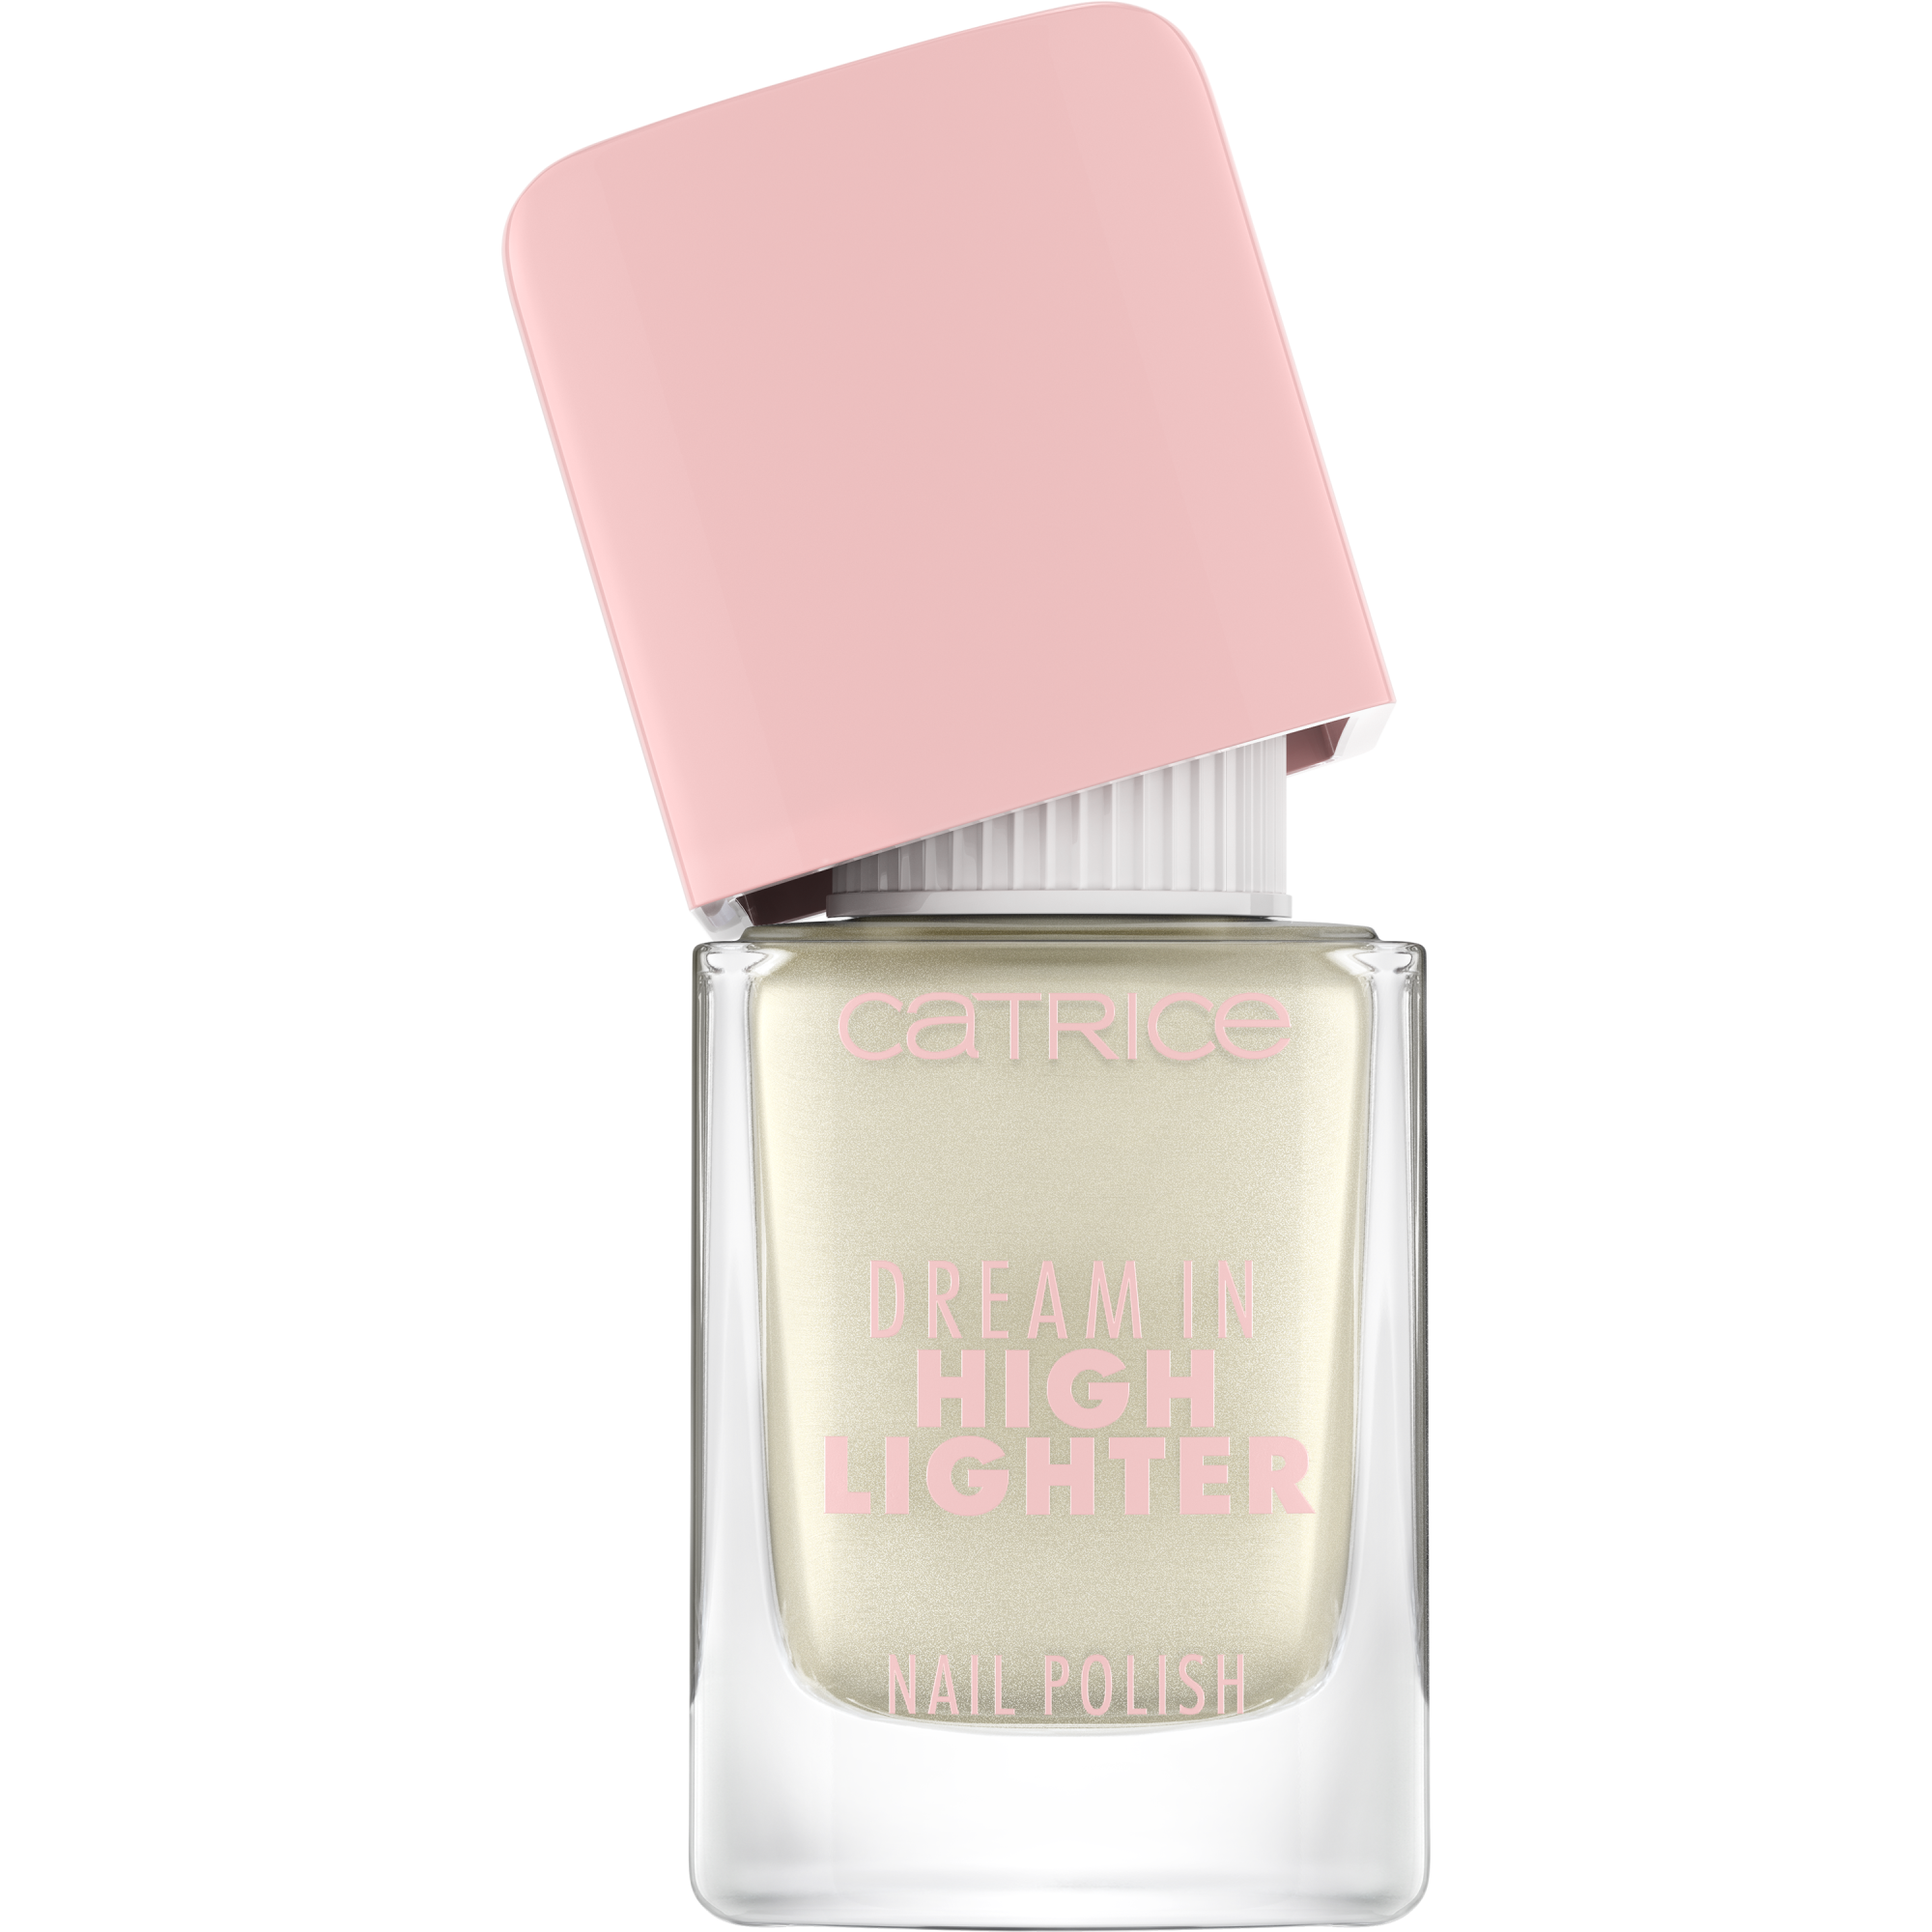 Dream In Highlighter Nail Polish vernis à ongles